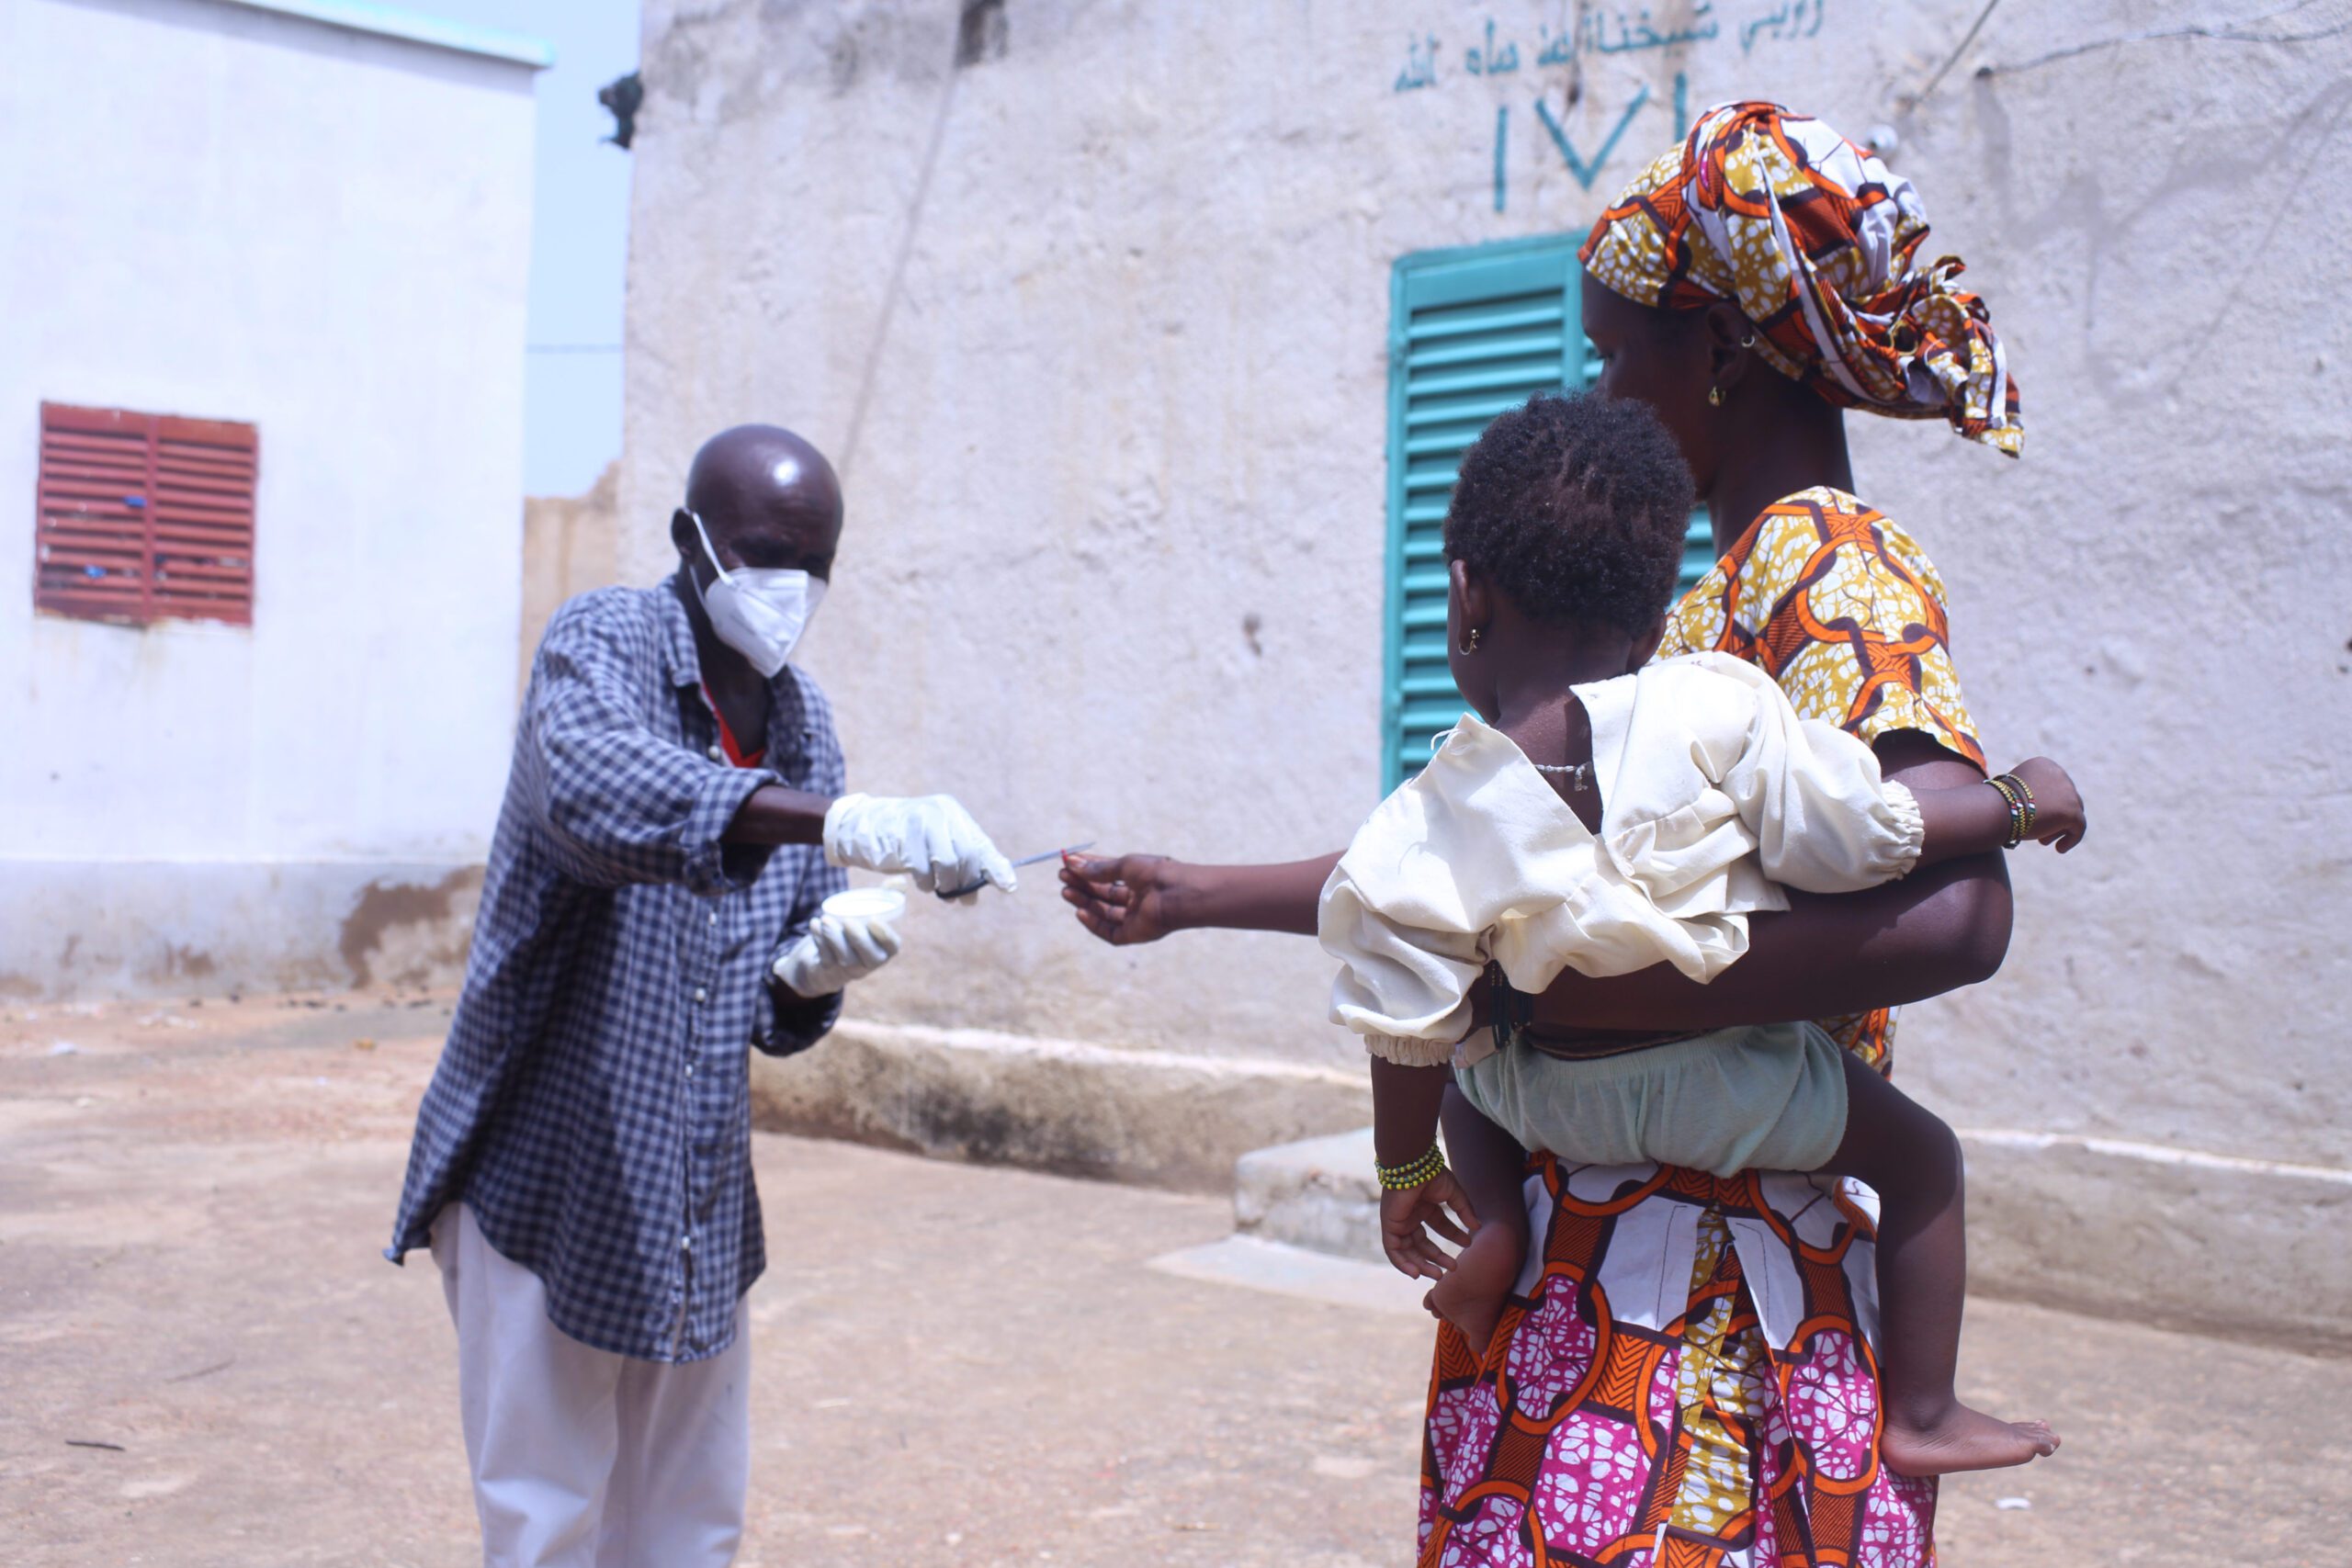 A health worker distances himself while preparing to deliver a dose of vitamin A to a young child being held by its mother